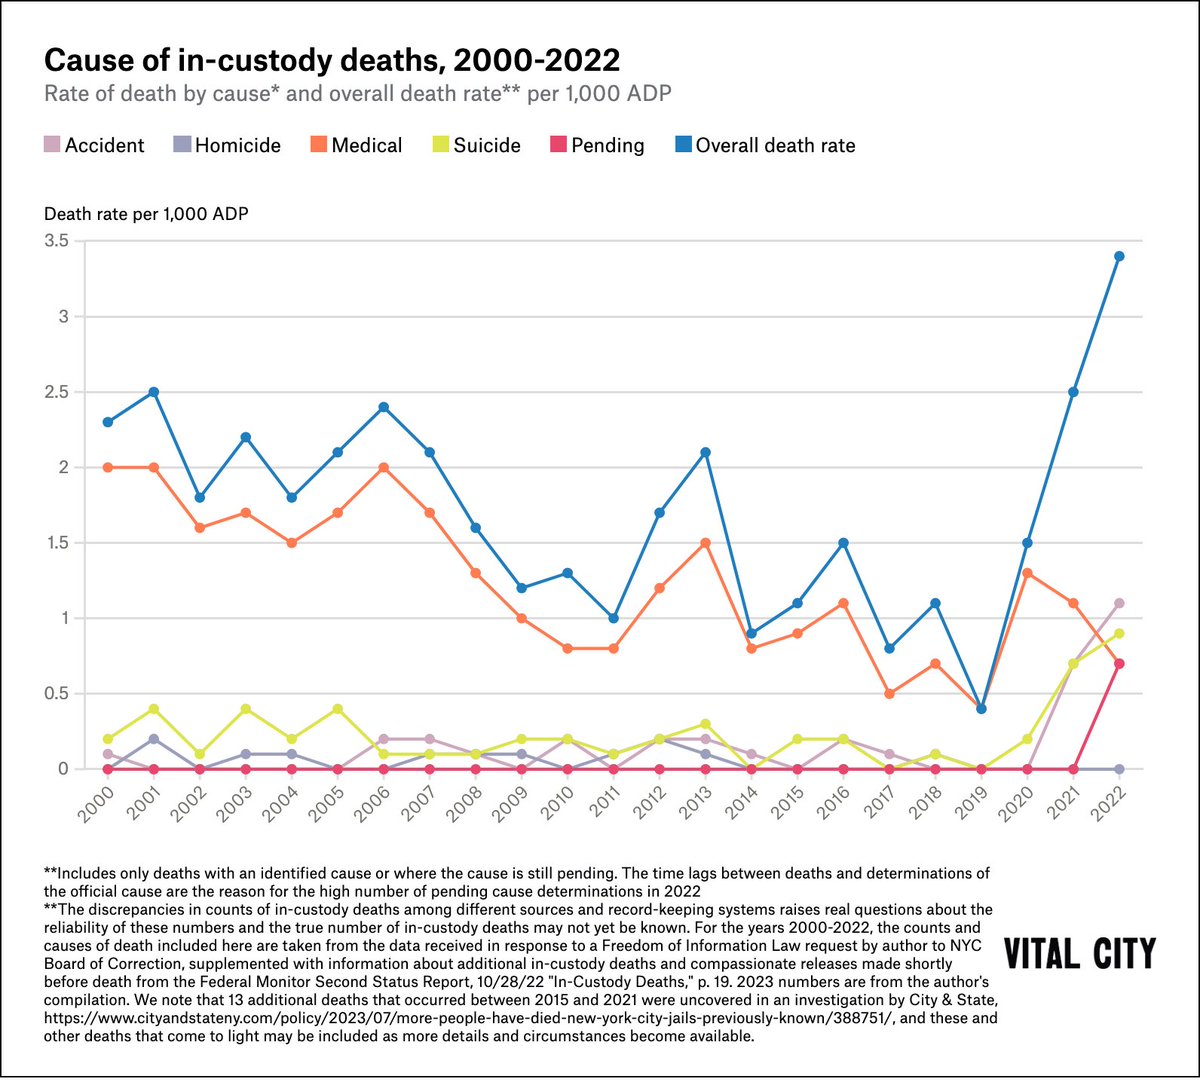 Our second new chart shows how death rates are rising overall and (or in one case falling) by type. Look at the suicide and accident lines in particular.